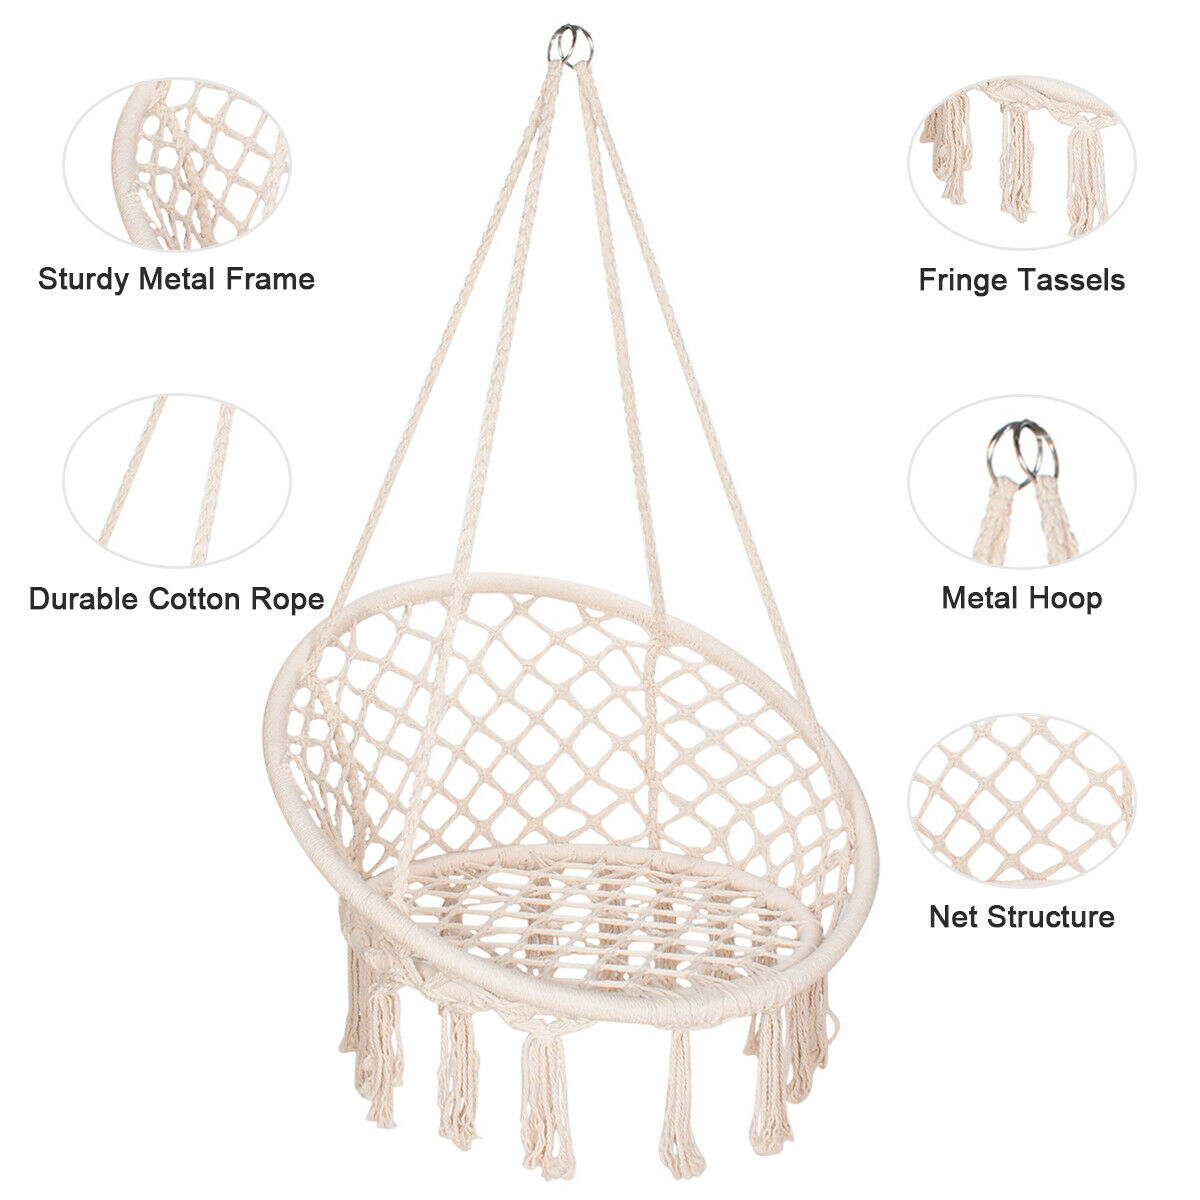 Outdoor Hanging Swing Cotton Hammock Chair Solid Mesh Woven Rope Yard Patio Porch Garden Wooden Bar Chair Swing Patio Chair With Install Tool Home Decor Gift - image 3 of 8